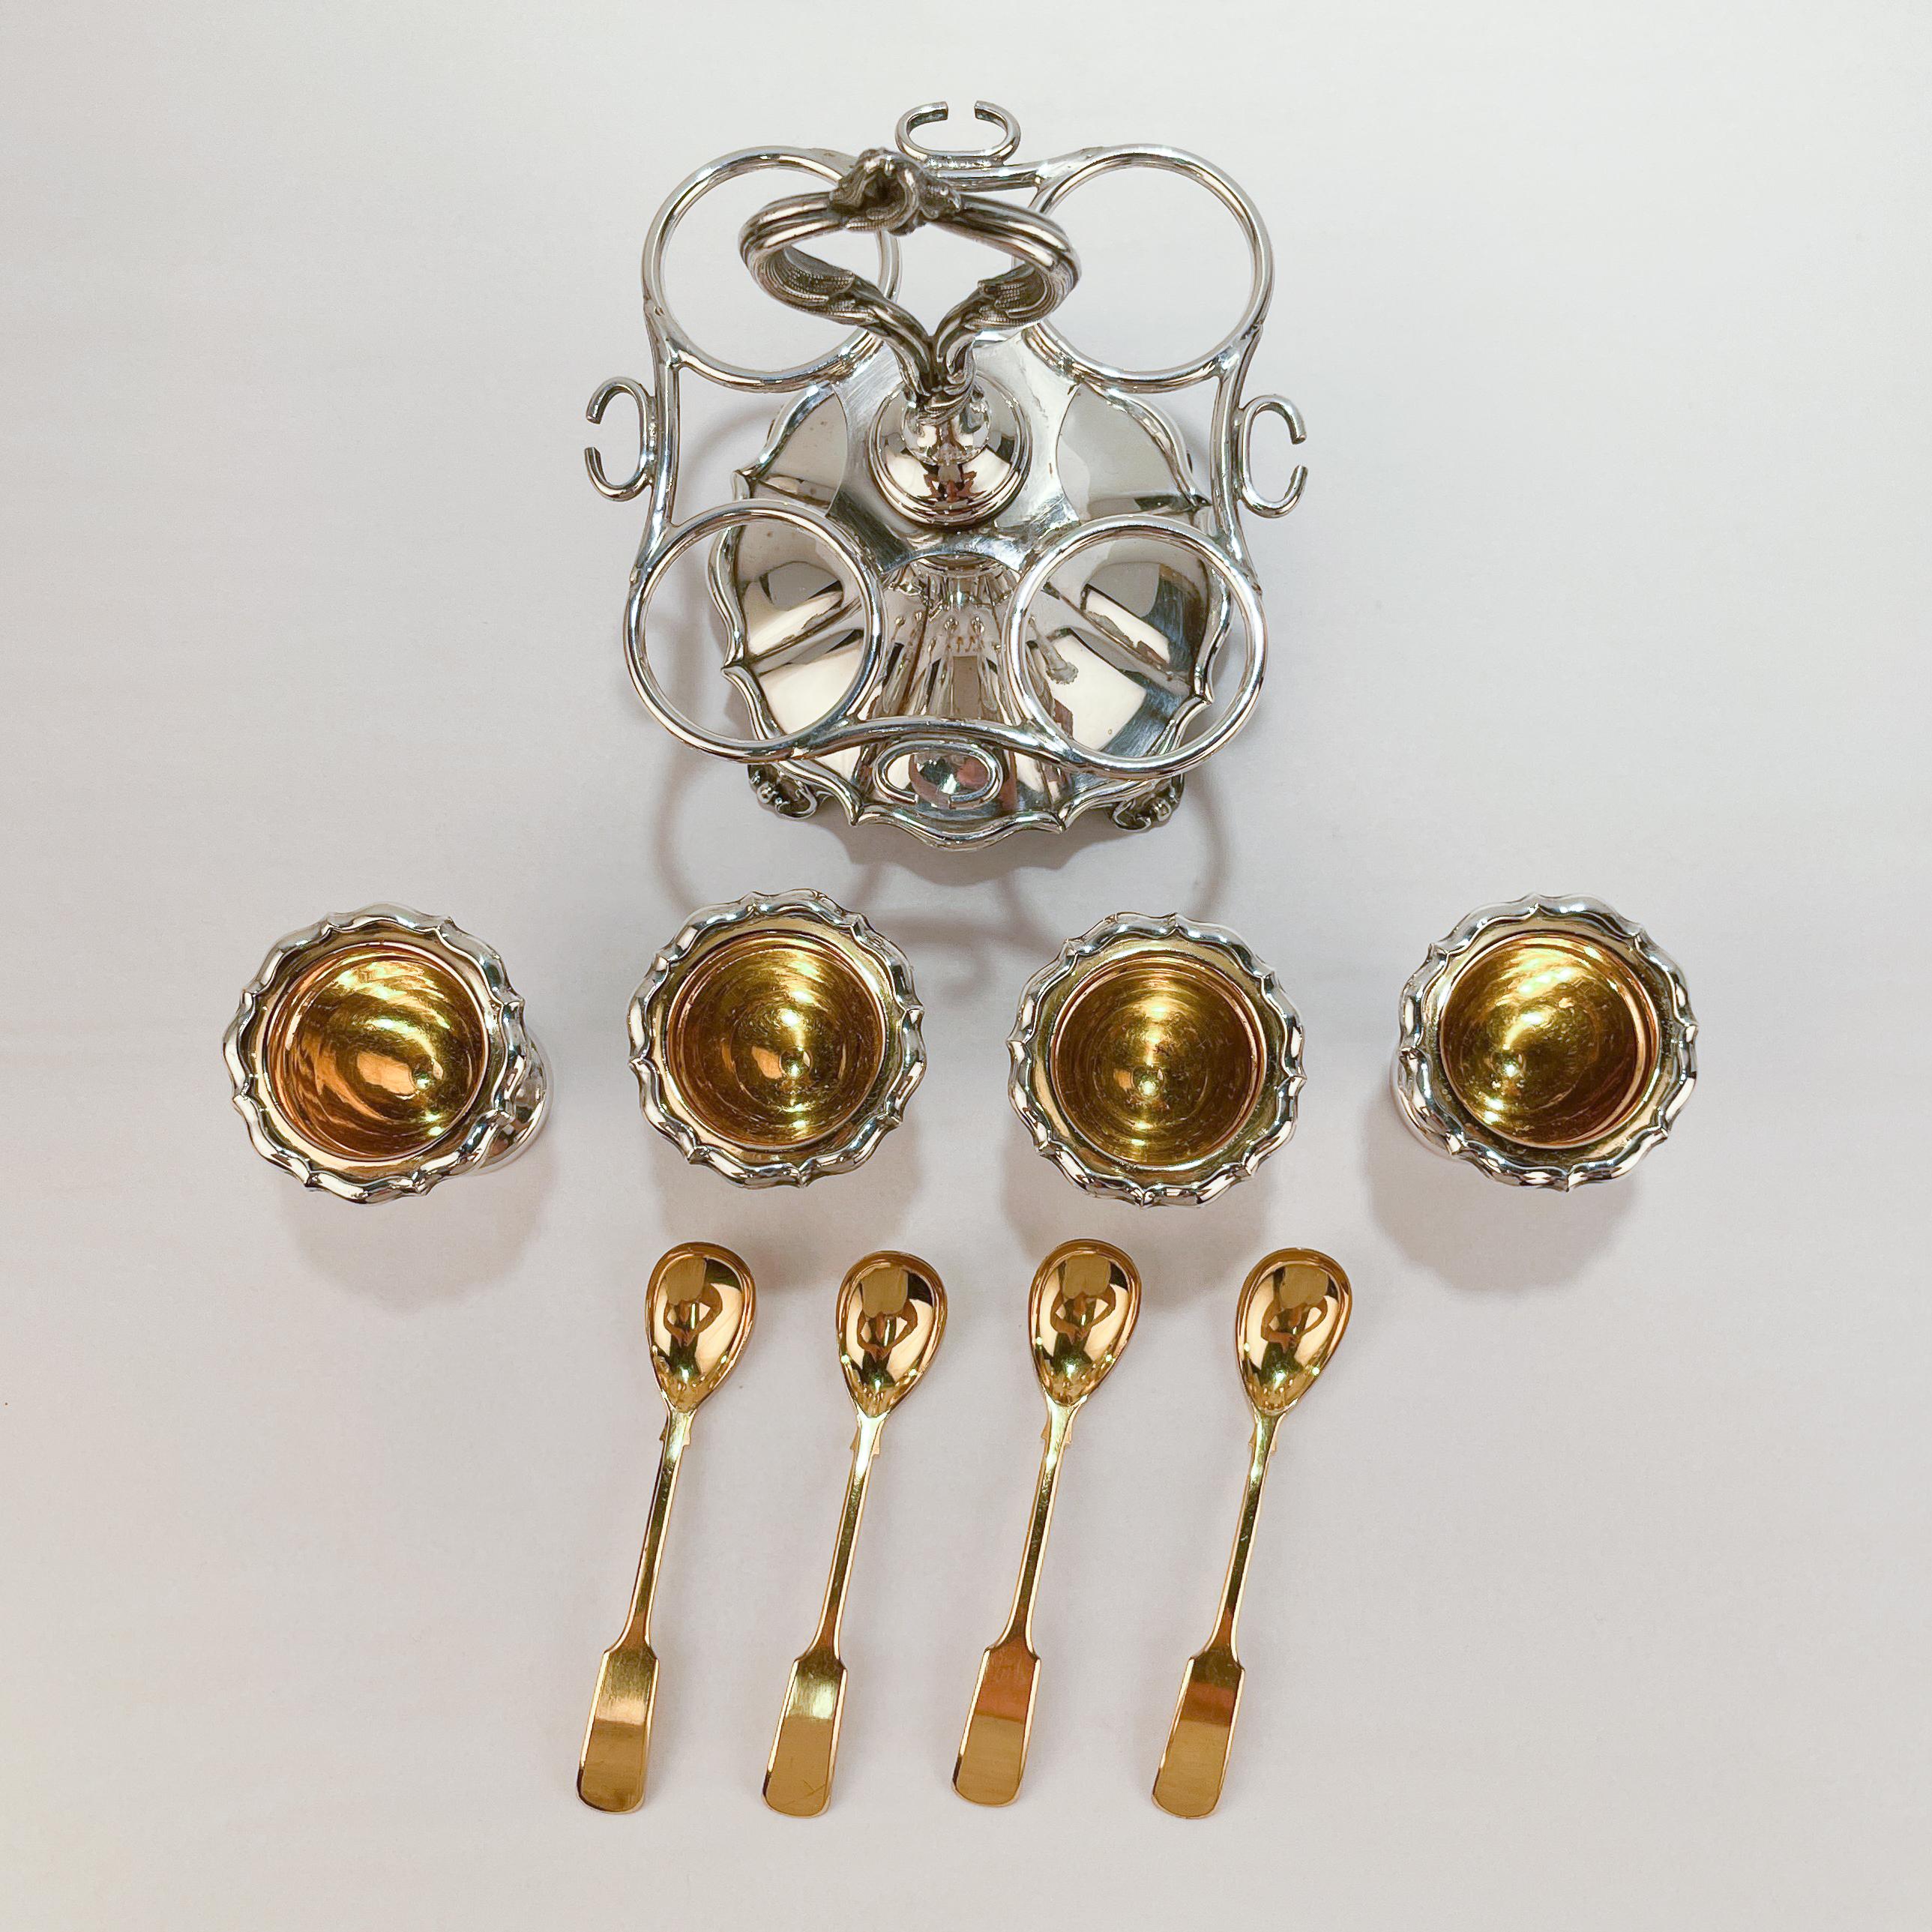 Antique 19th Century English Silver Plated Egg Cups and Stand For Sale 2